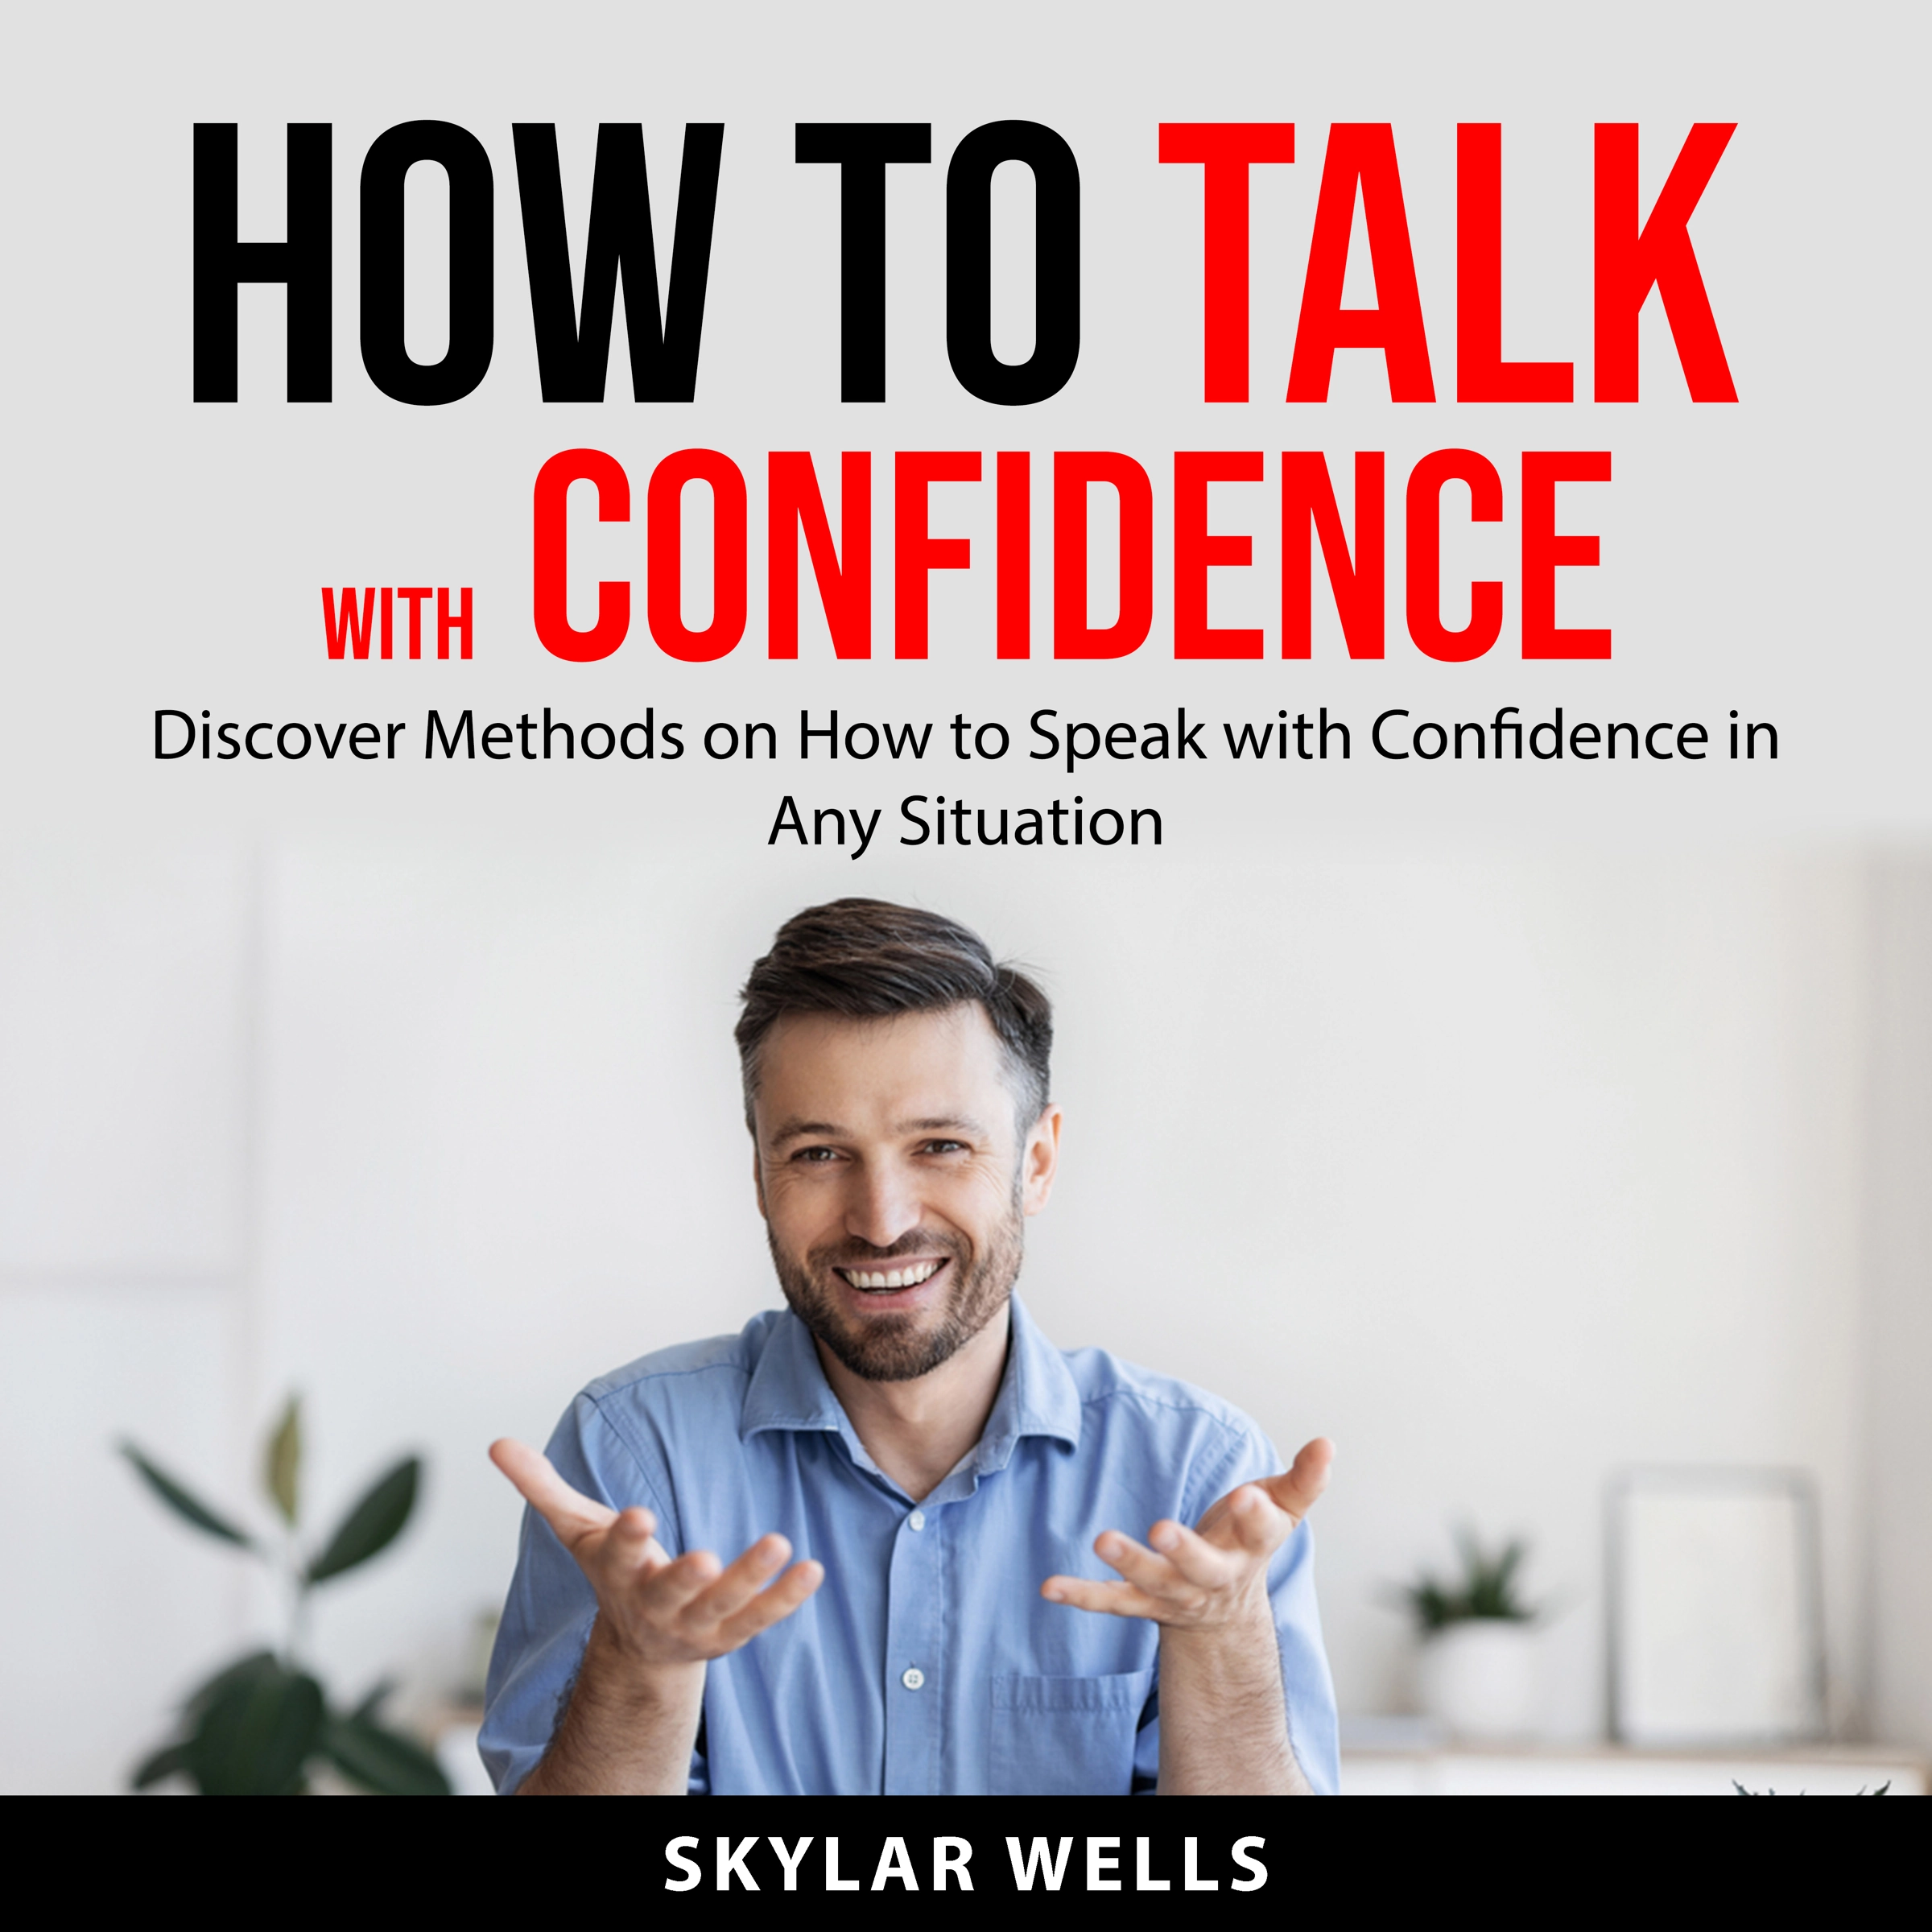 How to Talk with Confidence Audiobook by Skylar Wells